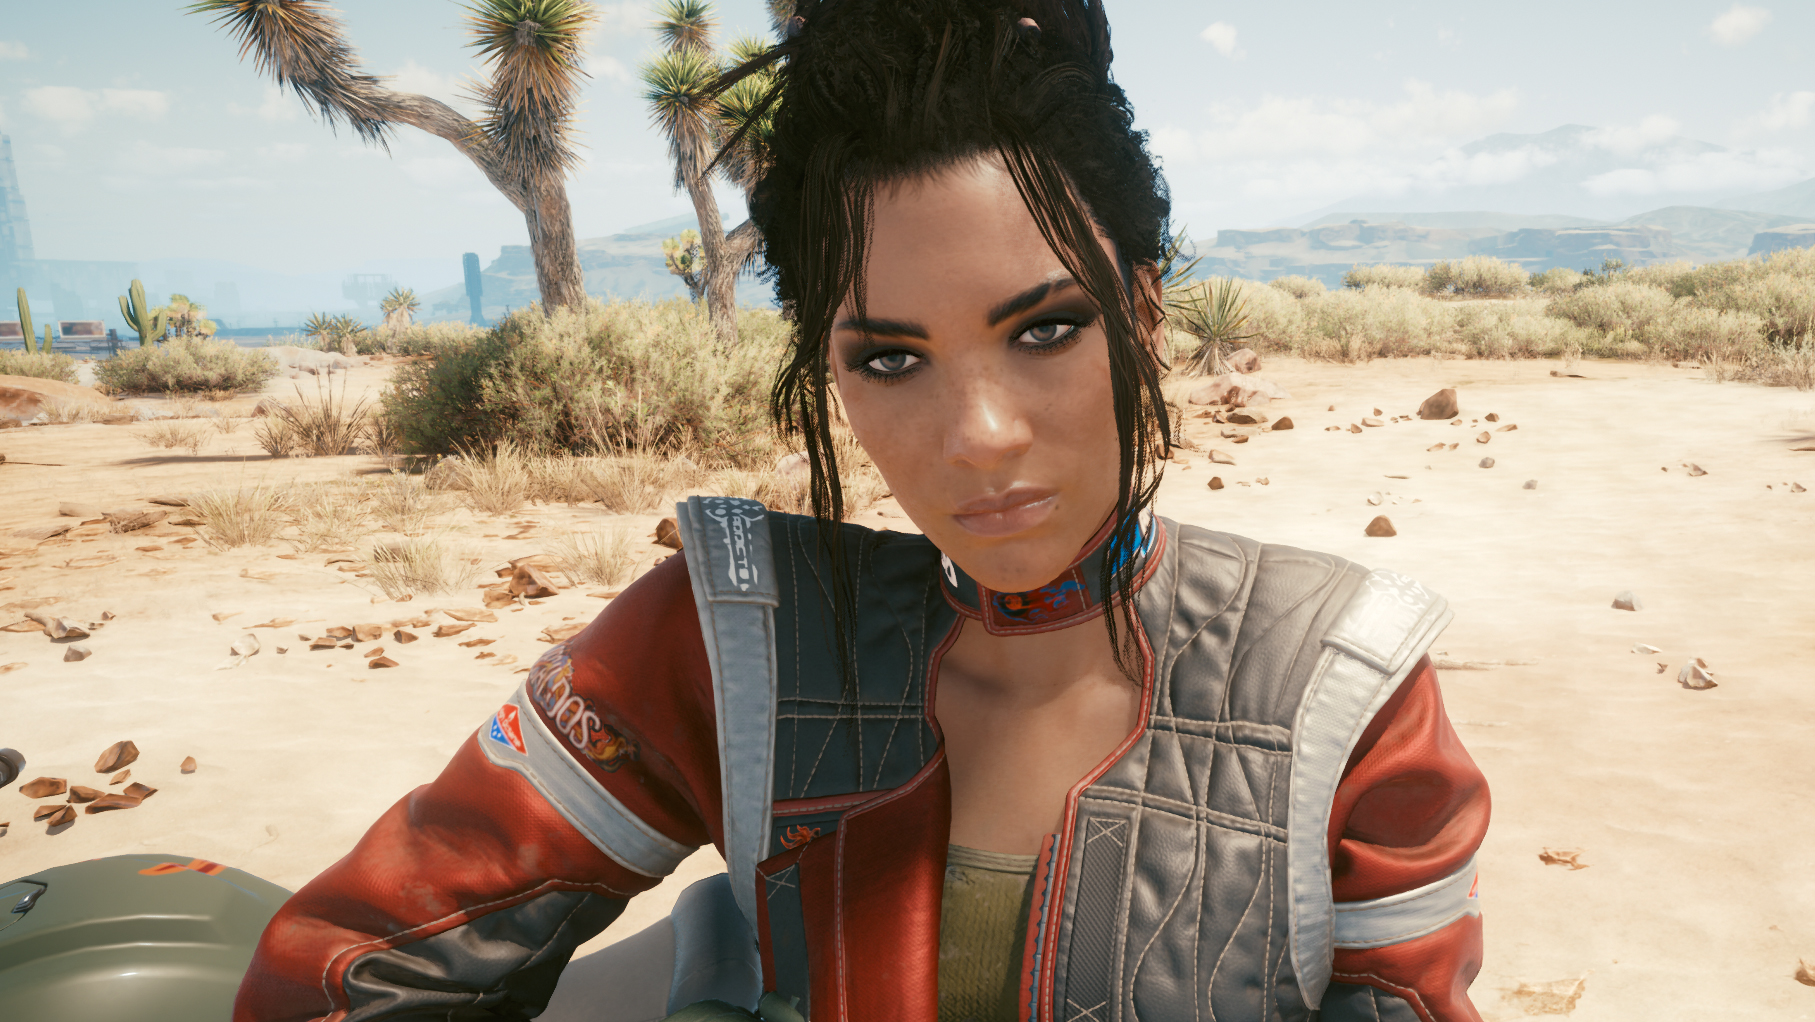  Cyberpunk 2077 patch prevents boobs from clipping through clothes 